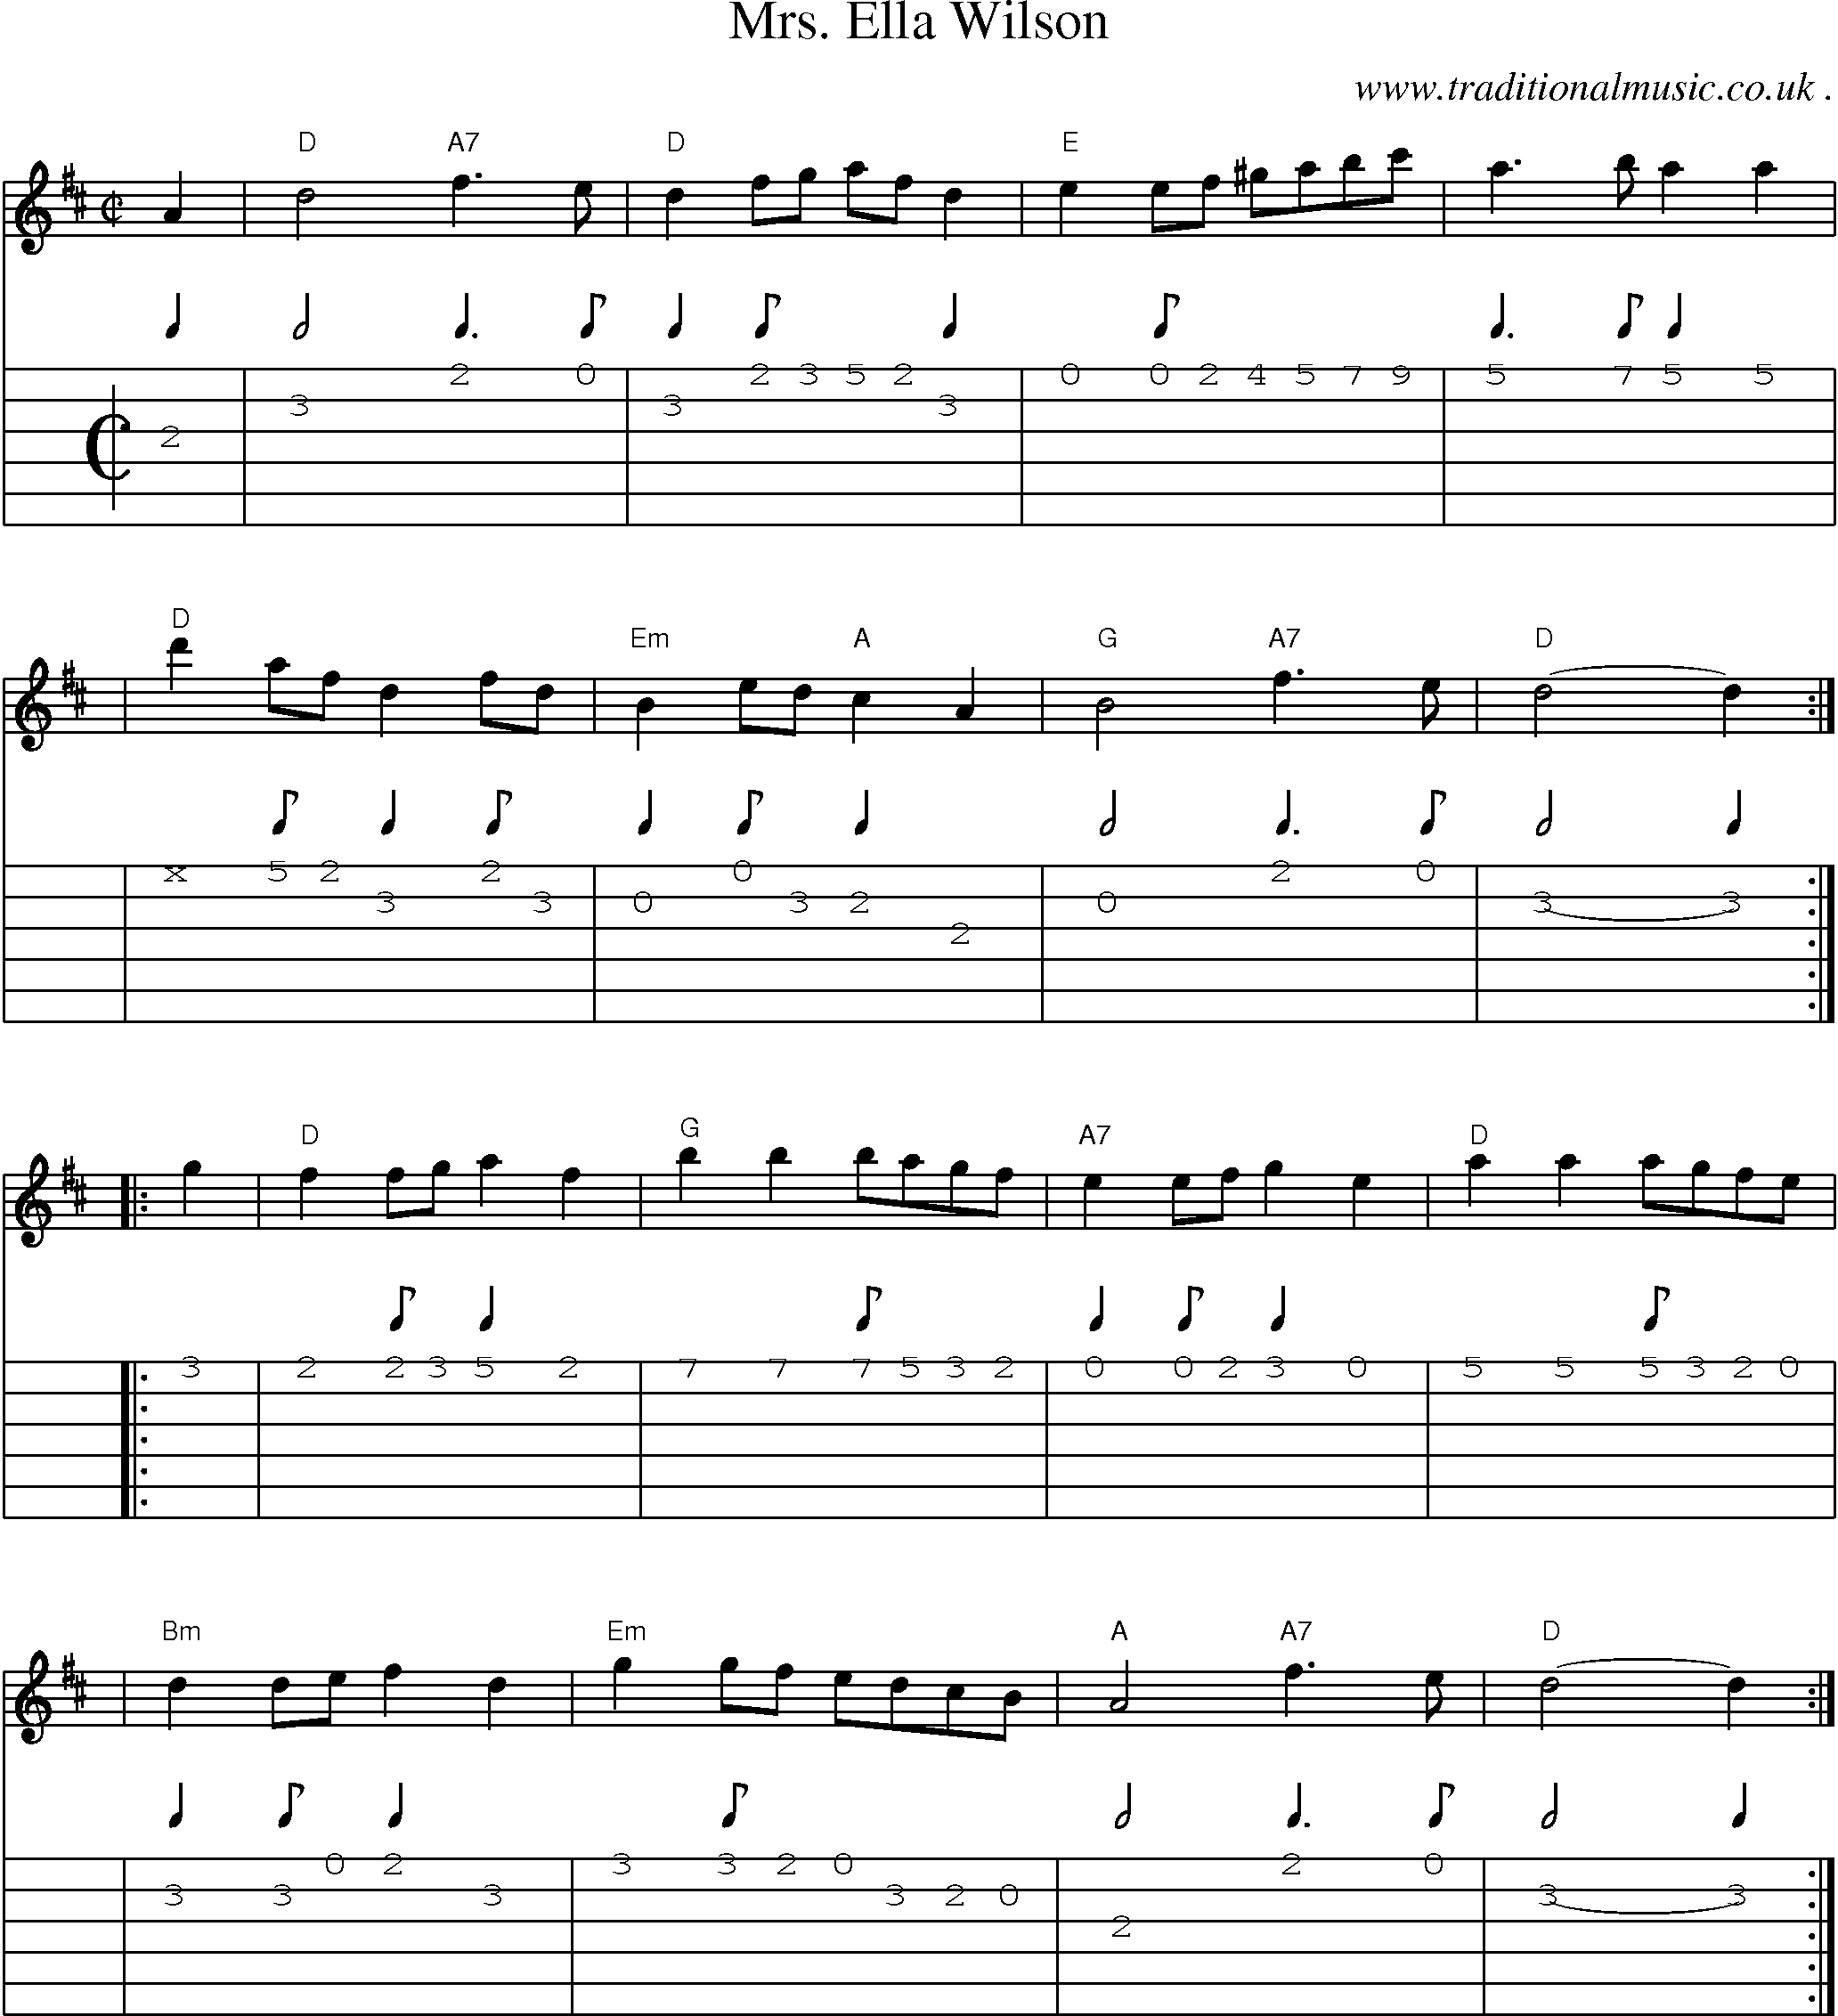 Sheet-music  score, Chords and Guitar Tabs for Mrs Ella Wilson